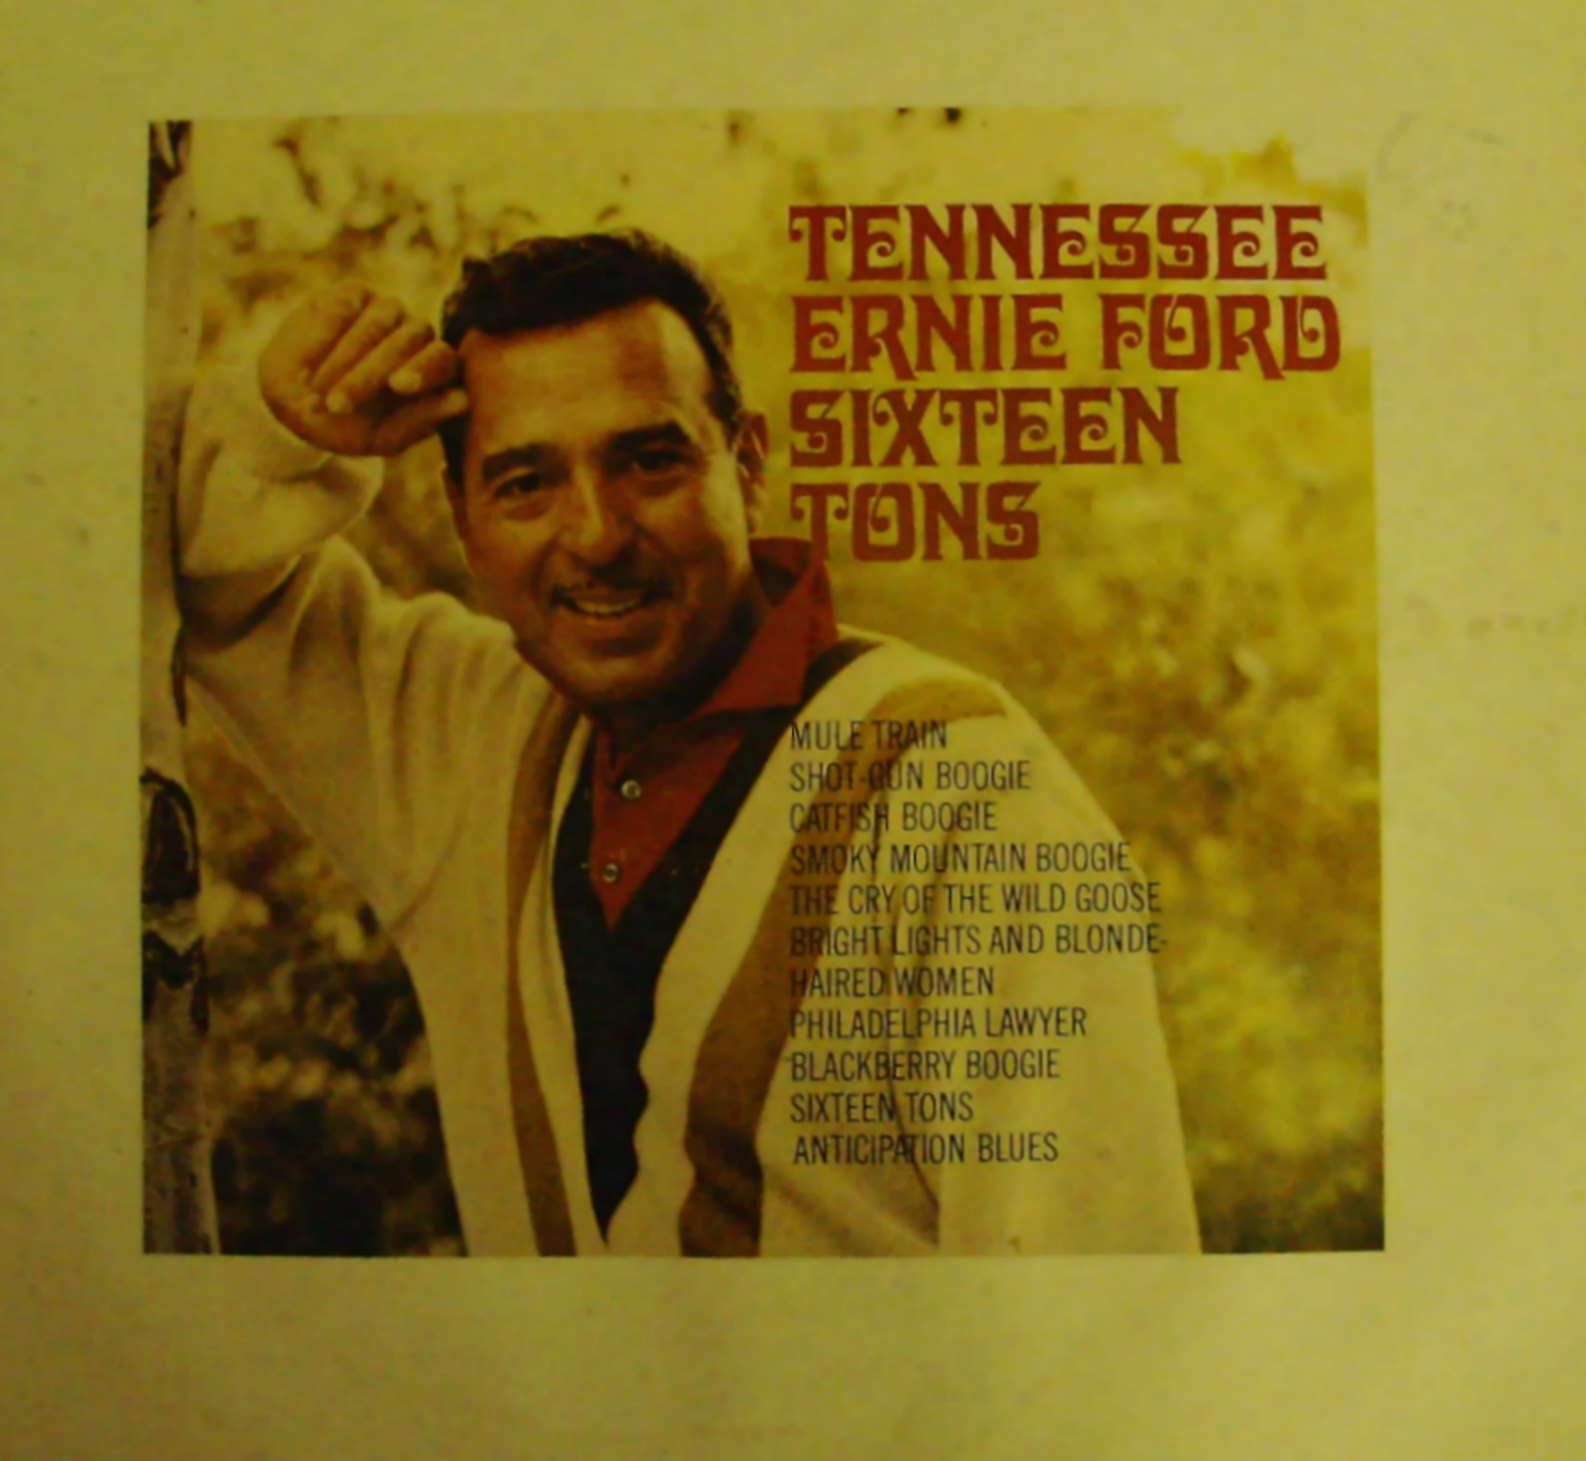 Bright lights and blonde haired women tennessee ernie ford #1